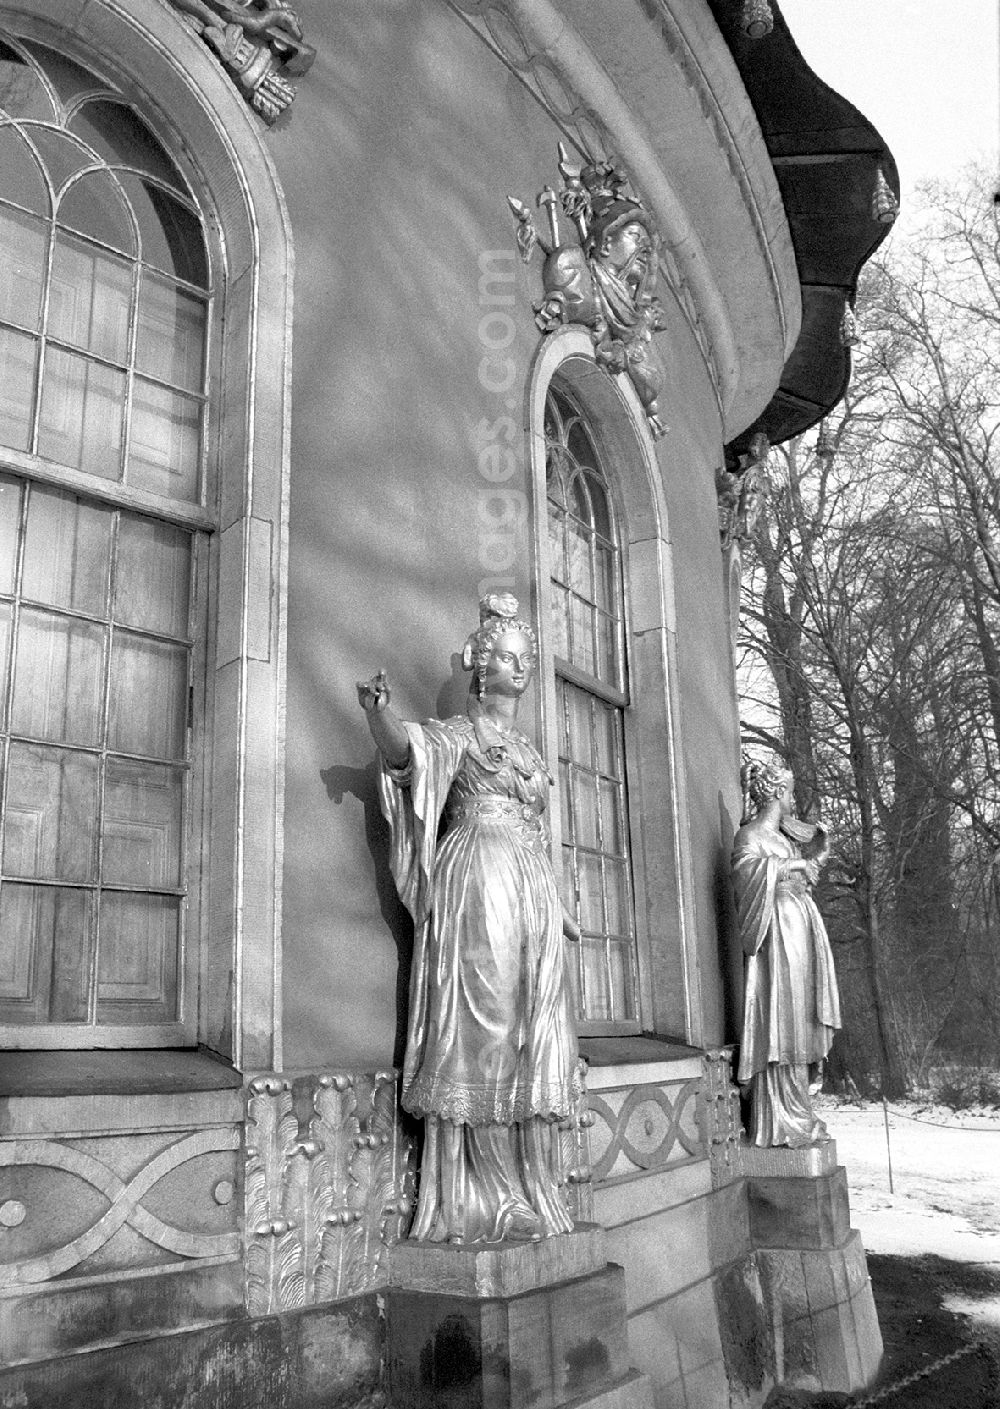 Potsdam: Group of figures at the Chinese Tea House in Sanssouci Park in Potsdam